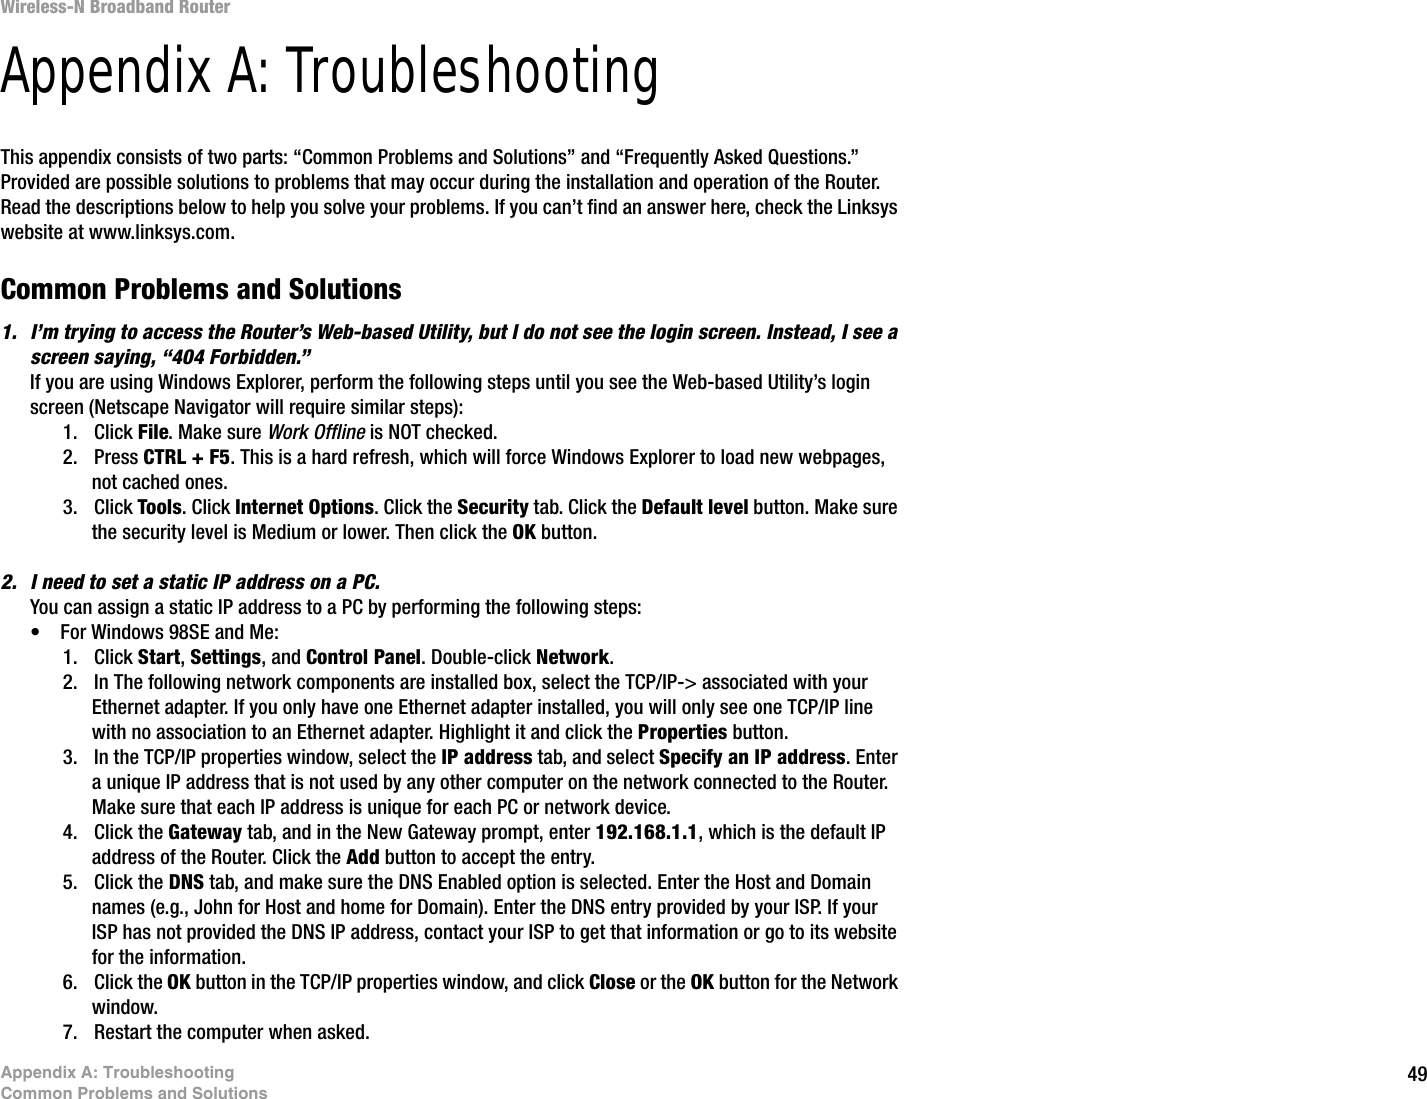 49Appendix A: TroubleshootingCommon Problems and SolutionsWireless-N Broadband RouterAppendix A: TroubleshootingThis appendix consists of two parts: “Common Problems and Solutions” and “Frequently Asked Questions.” Provided are possible solutions to problems that may occur during the installation and operation of the Router. Read the descriptions below to help you solve your problems. If you can’t find an answer here, check the Linksys website at www.linksys.com.Common Problems and Solutions1. I’m trying to access the Router’s Web-based Utility, but I do not see the login screen. Instead, I see a screen saying, “404 Forbidden.”If you are using Windows Explorer, perform the following steps until you see the Web-based Utility’s login screen (Netscape Navigator will require similar steps):1. Click File. Make sure Work Offline is NOT checked.2. Press CTRL + F5. This is a hard refresh, which will force Windows Explorer to load new webpages, not cached ones.3. Click Tools. Click Internet Options. Click the Security tab. Click the Default level button. Make sure the security level is Medium or lower. Then click the OK button.2. I need to set a static IP address on a PC.You can assign a static IP address to a PC by performing the following steps:• For Windows 98SE and Me:1. Click Start, Settings, and Control Panel. Double-click Network.2. In The following network components are installed box, select the TCP/IP-&gt; associated with your Ethernet adapter. If you only have one Ethernet adapter installed, you will only see one TCP/IP line with no association to an Ethernet adapter. Highlight it and click the Properties button.3. In the TCP/IP properties window, select the IP address tab, and select Specify an IP address. Enter a unique IP address that is not used by any other computer on the network connected to the Router. Make sure that each IP address is unique for each PC or network device.4. Click the Gateway tab, and in the New Gateway prompt, enter 192.168.1.1, which is the default IP address of the Router. Click the Add button to accept the entry.5. Click the DNS tab, and make sure the DNS Enabled option is selected. Enter the Host and Domain names (e.g., John for Host and home for Domain). Enter the DNS entry provided by your ISP. If your ISP has not provided the DNS IP address, contact your ISP to get that information or go to its website for the information.6. Click the OK button in the TCP/IP properties window, and click Close or the OK button for the Network window.7. Restart the computer when asked.